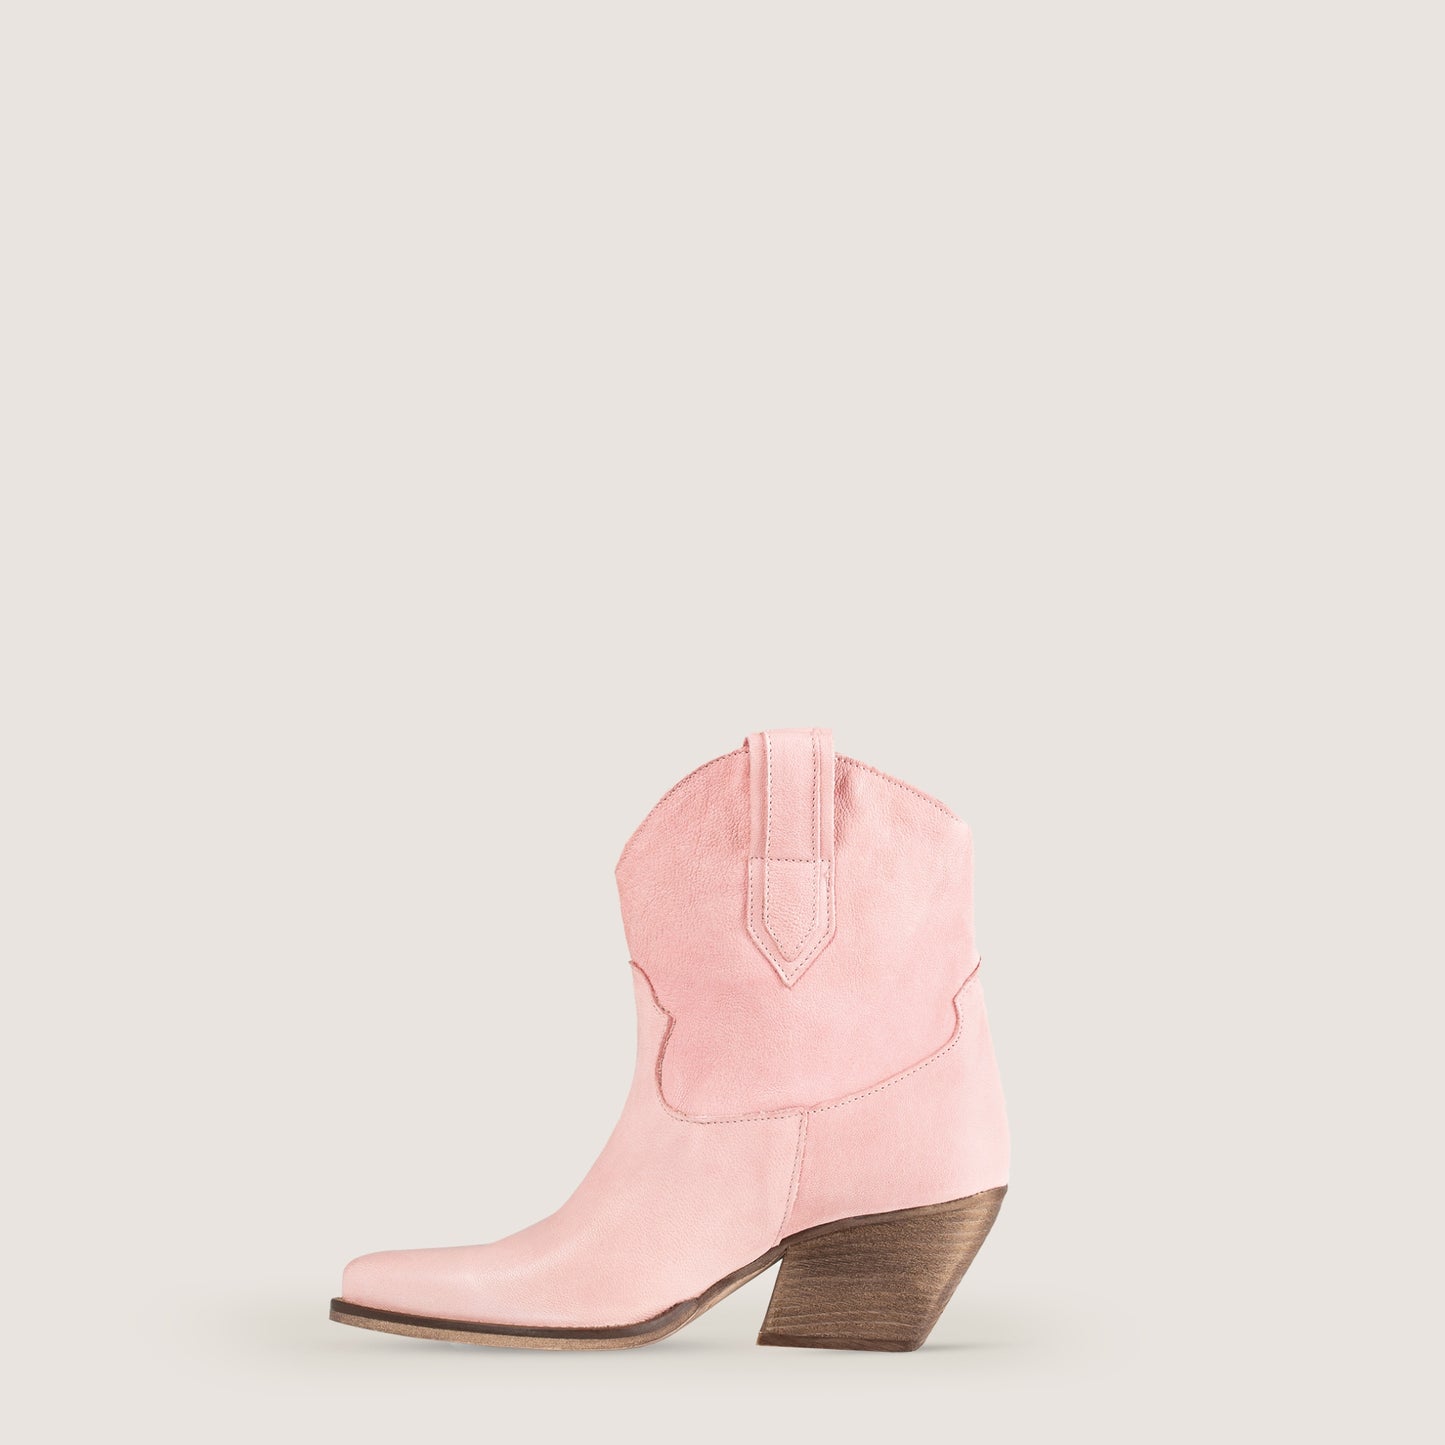 Ellie Texan ankle boots